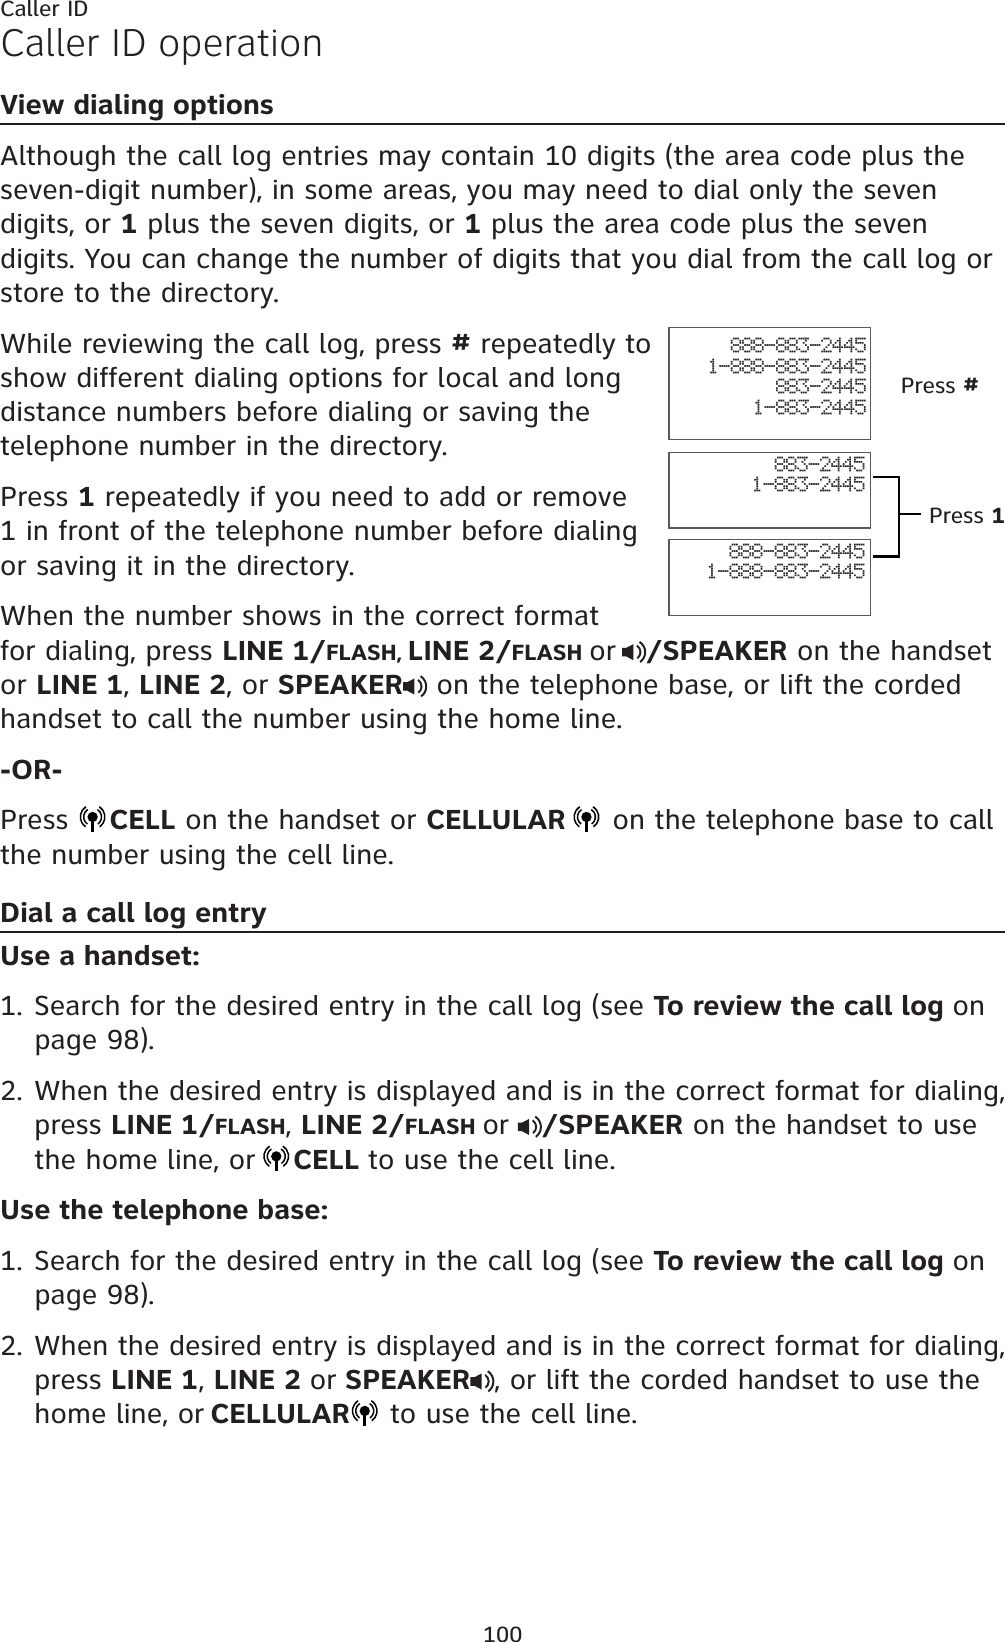 100Caller IDCaller ID operationView dialing optionsAlthough the call log entries may contain 10 digits (the area code plus the seven-digit number), in some areas, you may need to dial only the seven digits, or 1 plus the seven digits, or 1 plus the area code plus the seven digits. You can change the number of digits that you dial from the call log or store to the directory. While reviewing the call log, press # repeatedly to show different dialing options for local and long distance numbers before dialing or saving the telephone number in the directory.Press 1 repeatedly if you need to add or remove 1 in front of the telephone number before dialing or saving it in the directory.When the number shows in the correct format for dialing, press LINE 1/FLASH,LINE 2/FLASH or /SPEAKER on the handset or LINE 1,LINE 2, or SPEAKER  on the telephone base, or lift the corded handset to call the number using the home line.-OR-Press  CELL on the handset or CELLULAR  on the telephone base to call the number using the cell line.Dial a call log entryUse a handset:Search for the desired entry in the call log (see To review the call log onpage 98).When the desired entry is displayed and is in the correct format for dialing, press LINE 1/FLASH,LINE 2/FLASH or /SPEAKER on the handset to use the home line, or CELL to use the cell line.Use the telephone base:Search for the desired entry in the call log (see To review the call log onpage 98).When the desired entry is displayed and is in the correct format for dialing, press LINE 1,LINE 2 or SPEAKER , or lift the corded handset to use the home line, or CELLULAR to use the cell line.1.2.1.2.888-883-24451-888-883-2445883-24451-883-2445888-883-24451-888-883-2445883-24451-883-2445Press #Press 1